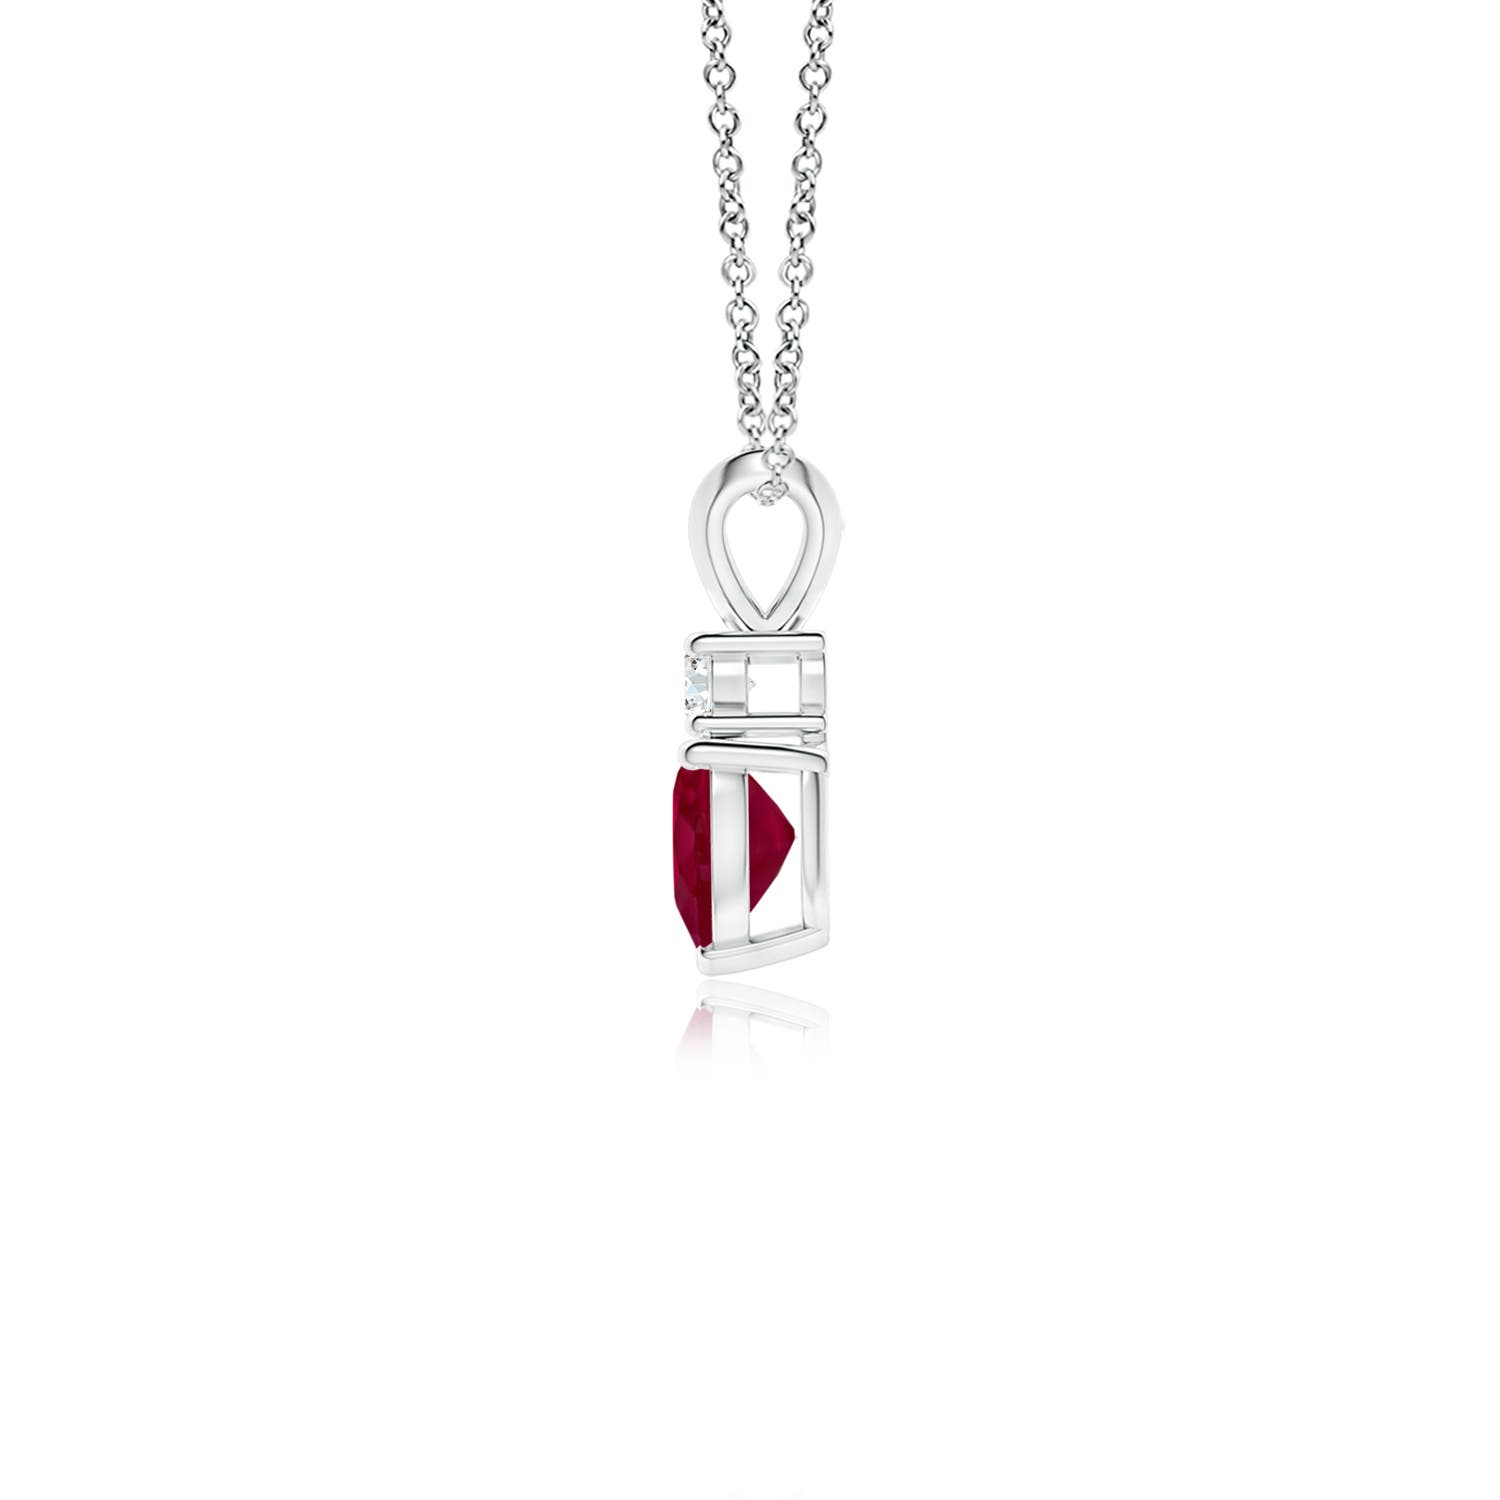 A - Ruby / 0.59 CT / 14 KT White Gold